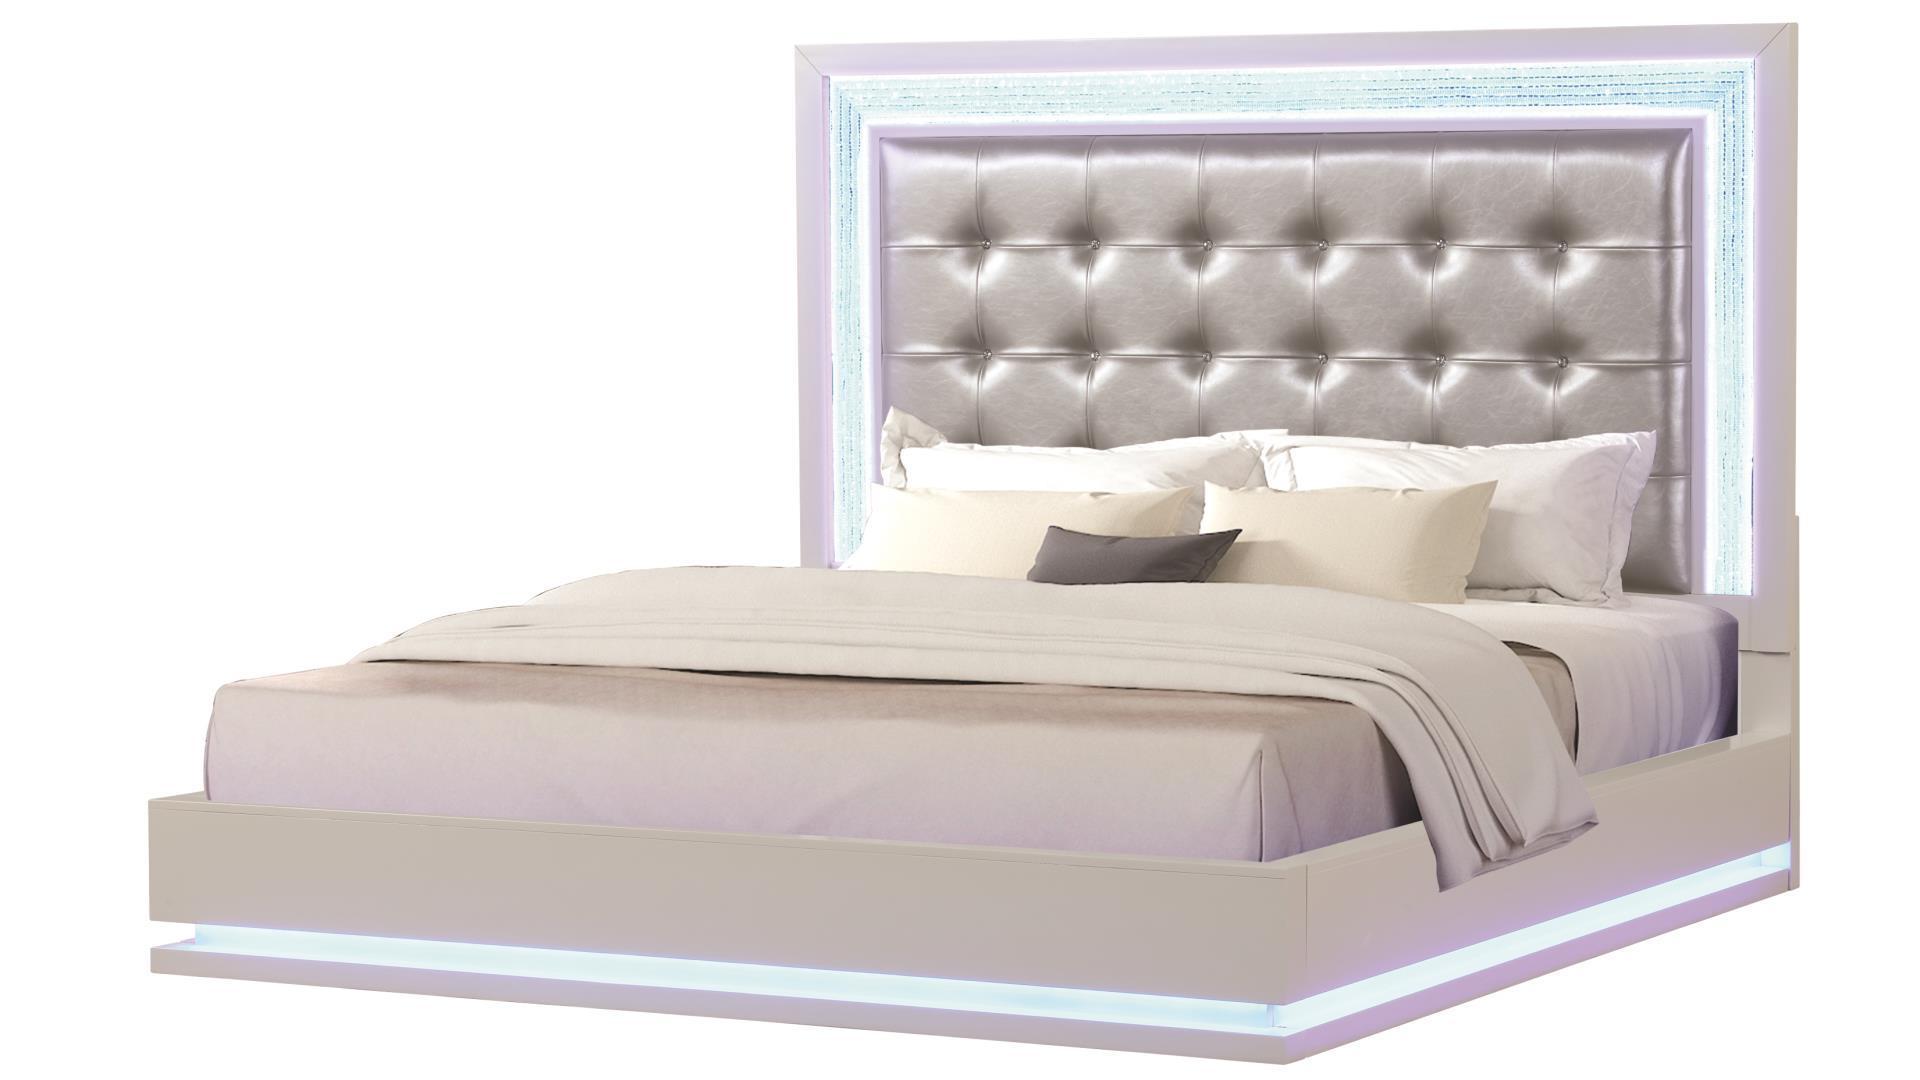 

    
Milky White Tufted King Led Bed Set w/Vanity 4P PASSION Galaxy Home Contemporary
